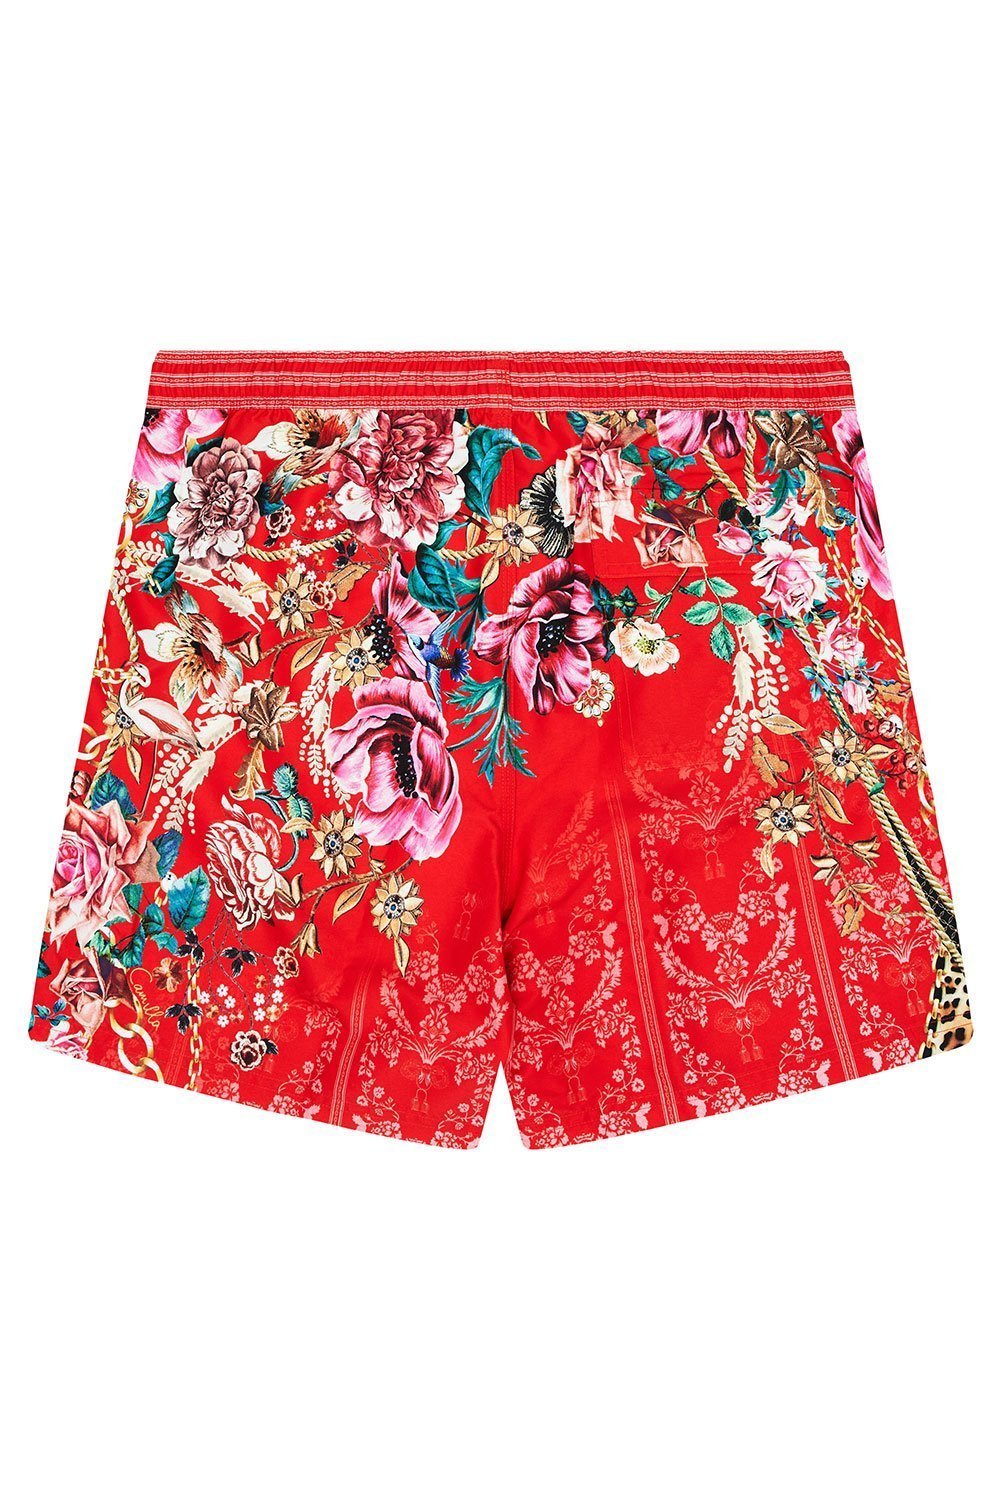 ELASTIC WAIST BOARDSHORT AND THE QUEEN WORE RED